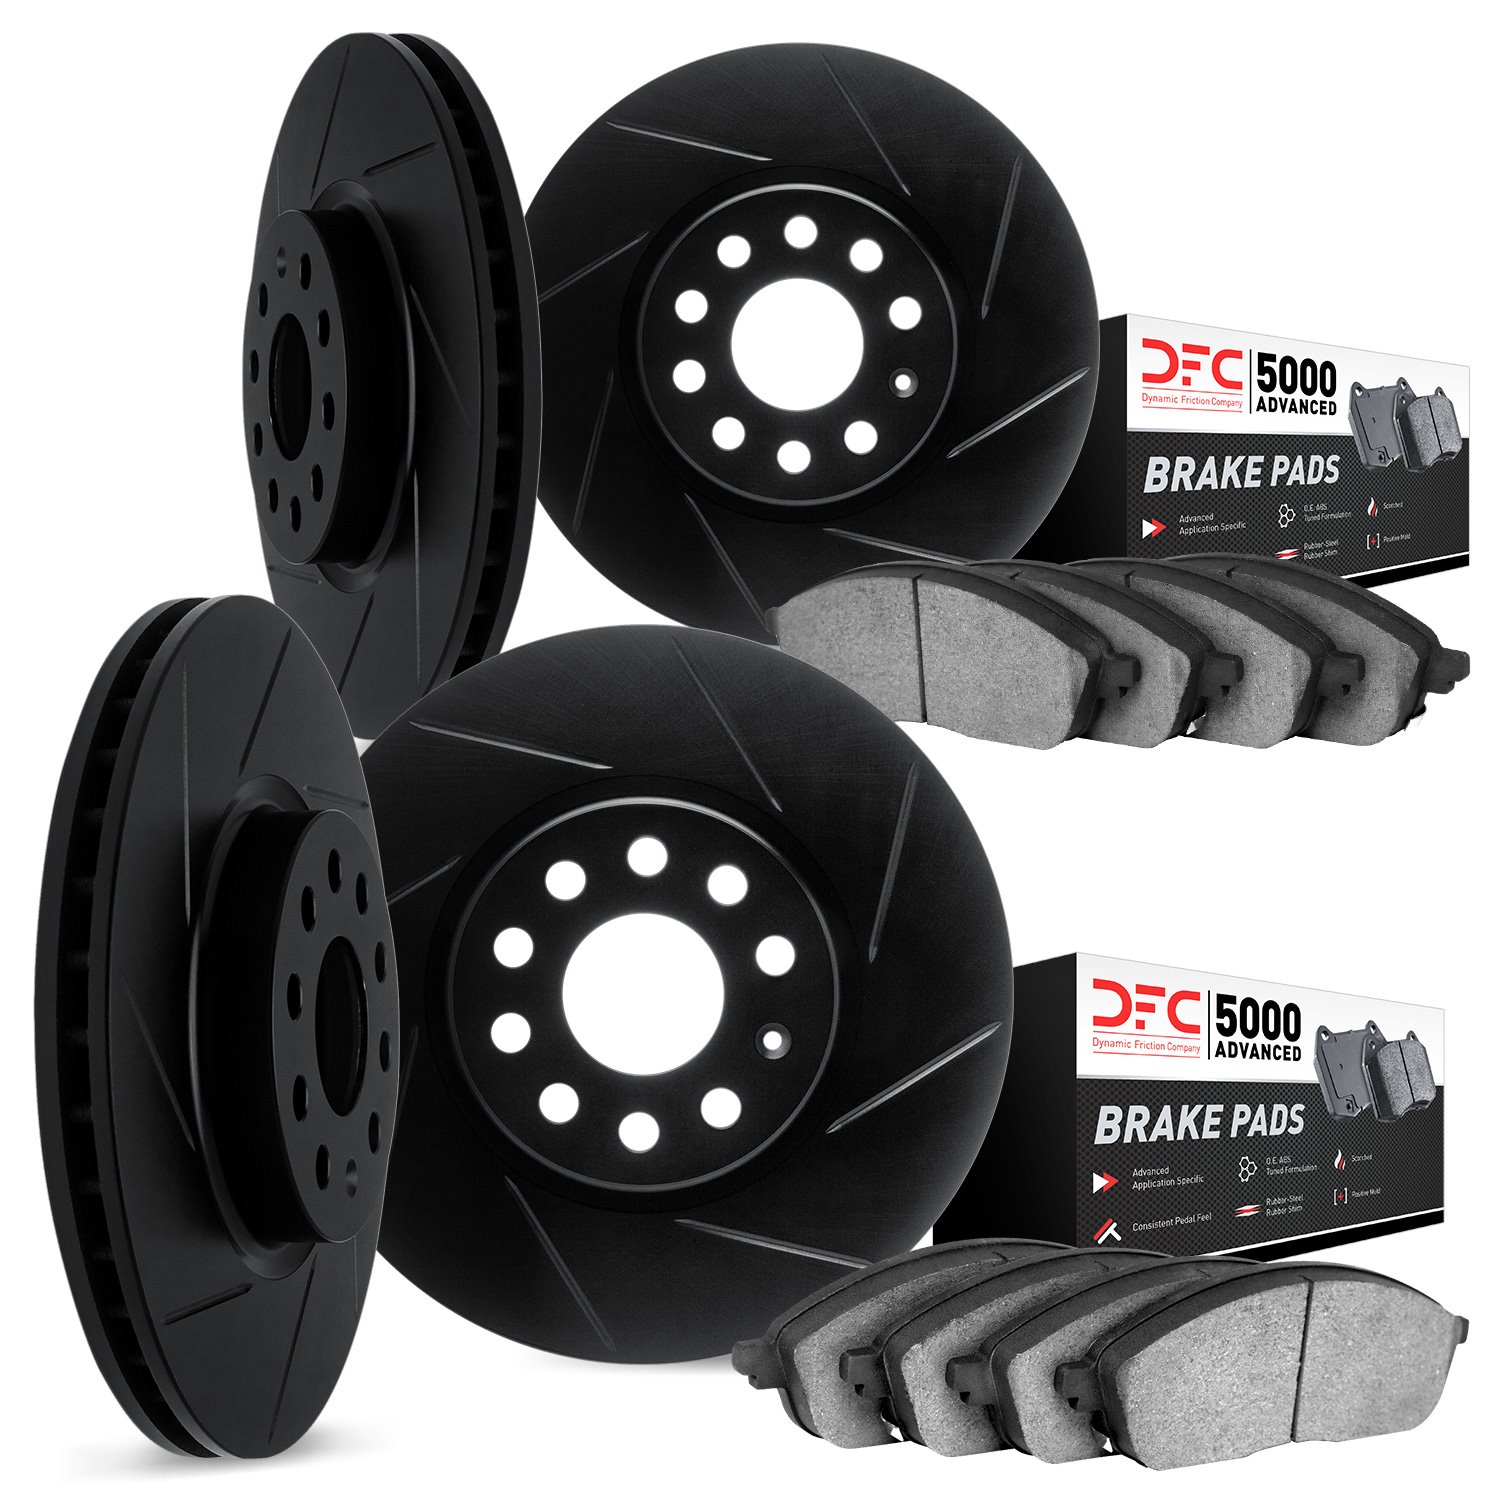 3514-31061 Slotted Brake Rotors w/5000 Advanced Brake Pads Kit & Hardware [Black], 2011-2012 BMW, Position: Front and Rear